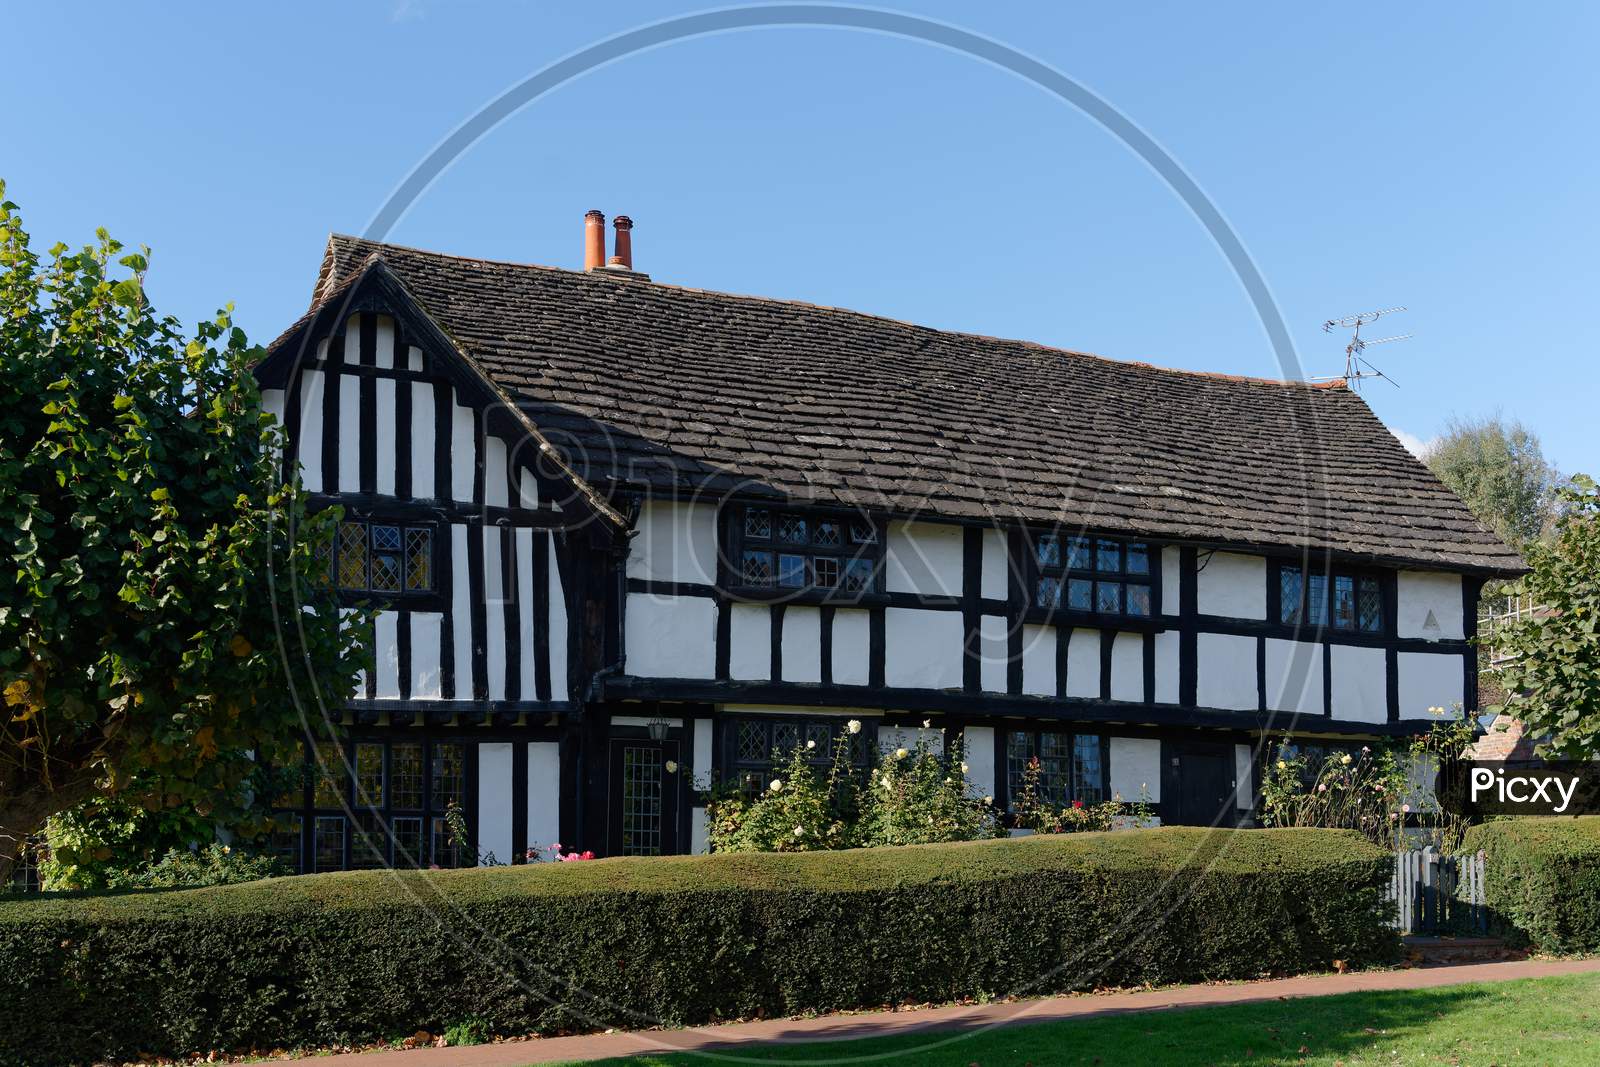 Lindfield, West Sussex/Uk -October 29 : View Of A Tudor Style House  In The Village Of Lindfield West Sussex On October 29, 2018